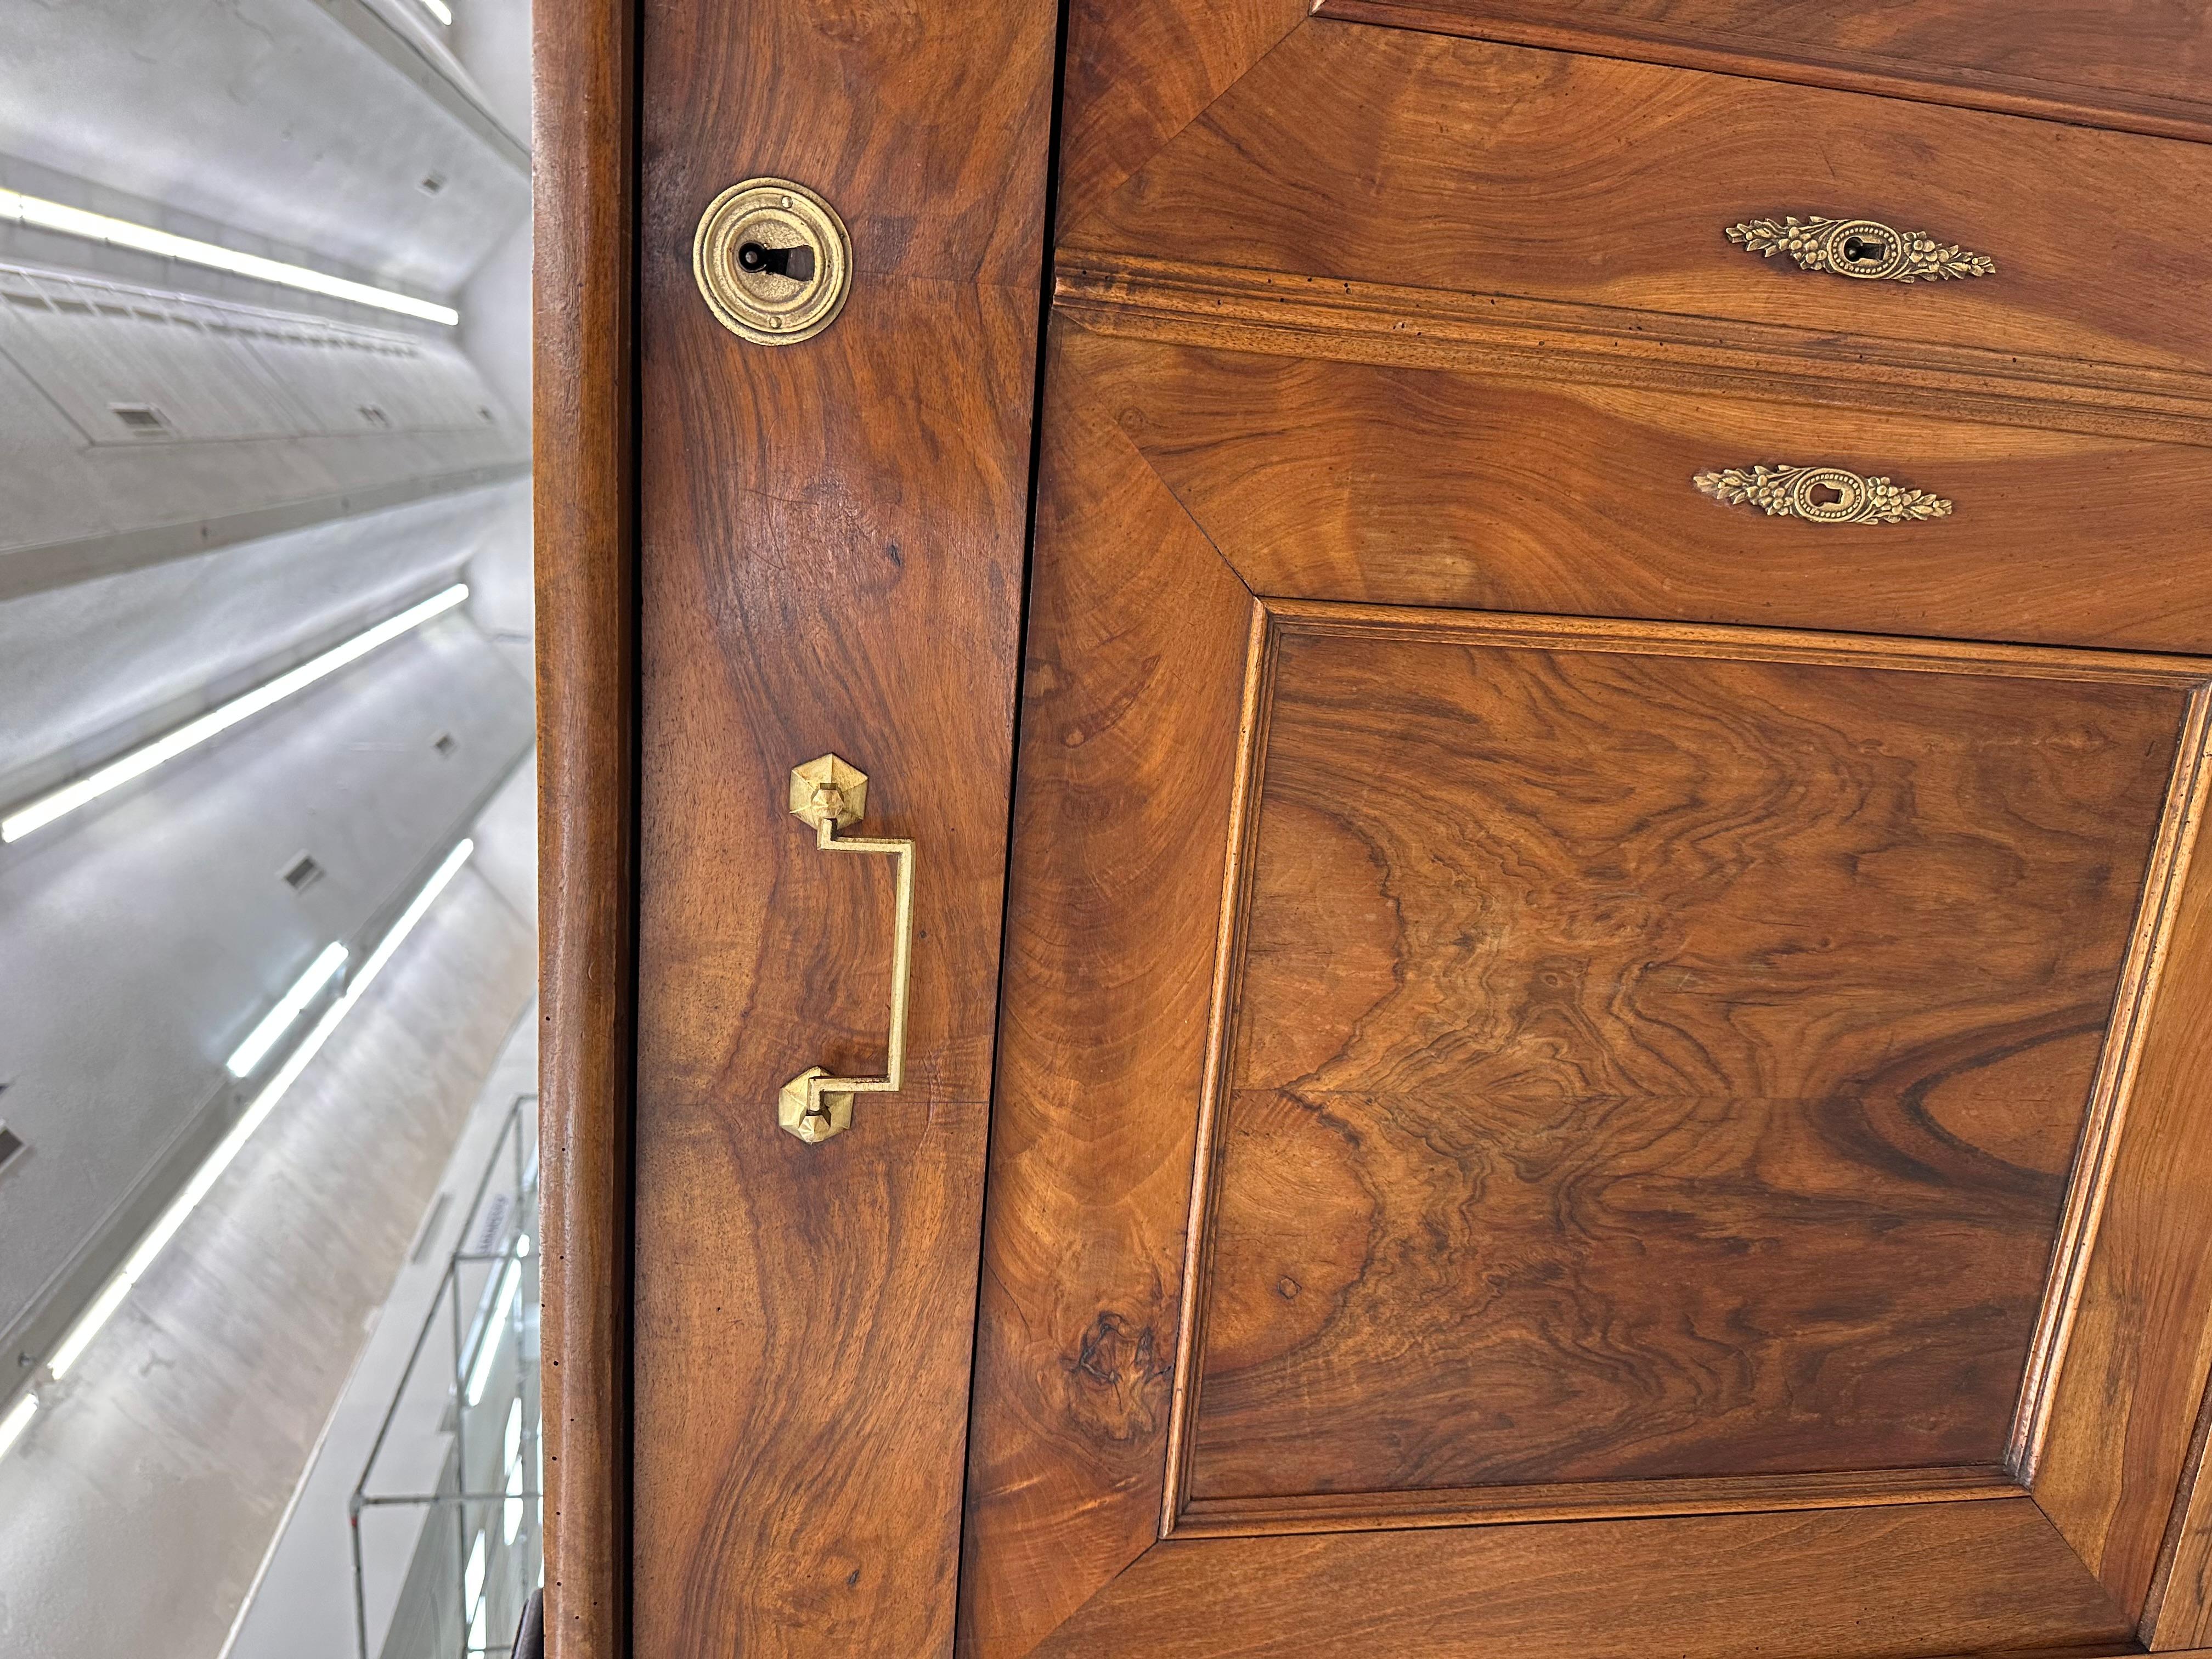 This is a beautiful 19th century French server! The burled walnut presents an amazing natural design that is excellently showcased by the clean and simple lines of the Louis Philippe era. The brass escutcheon and handles adds just the right amount